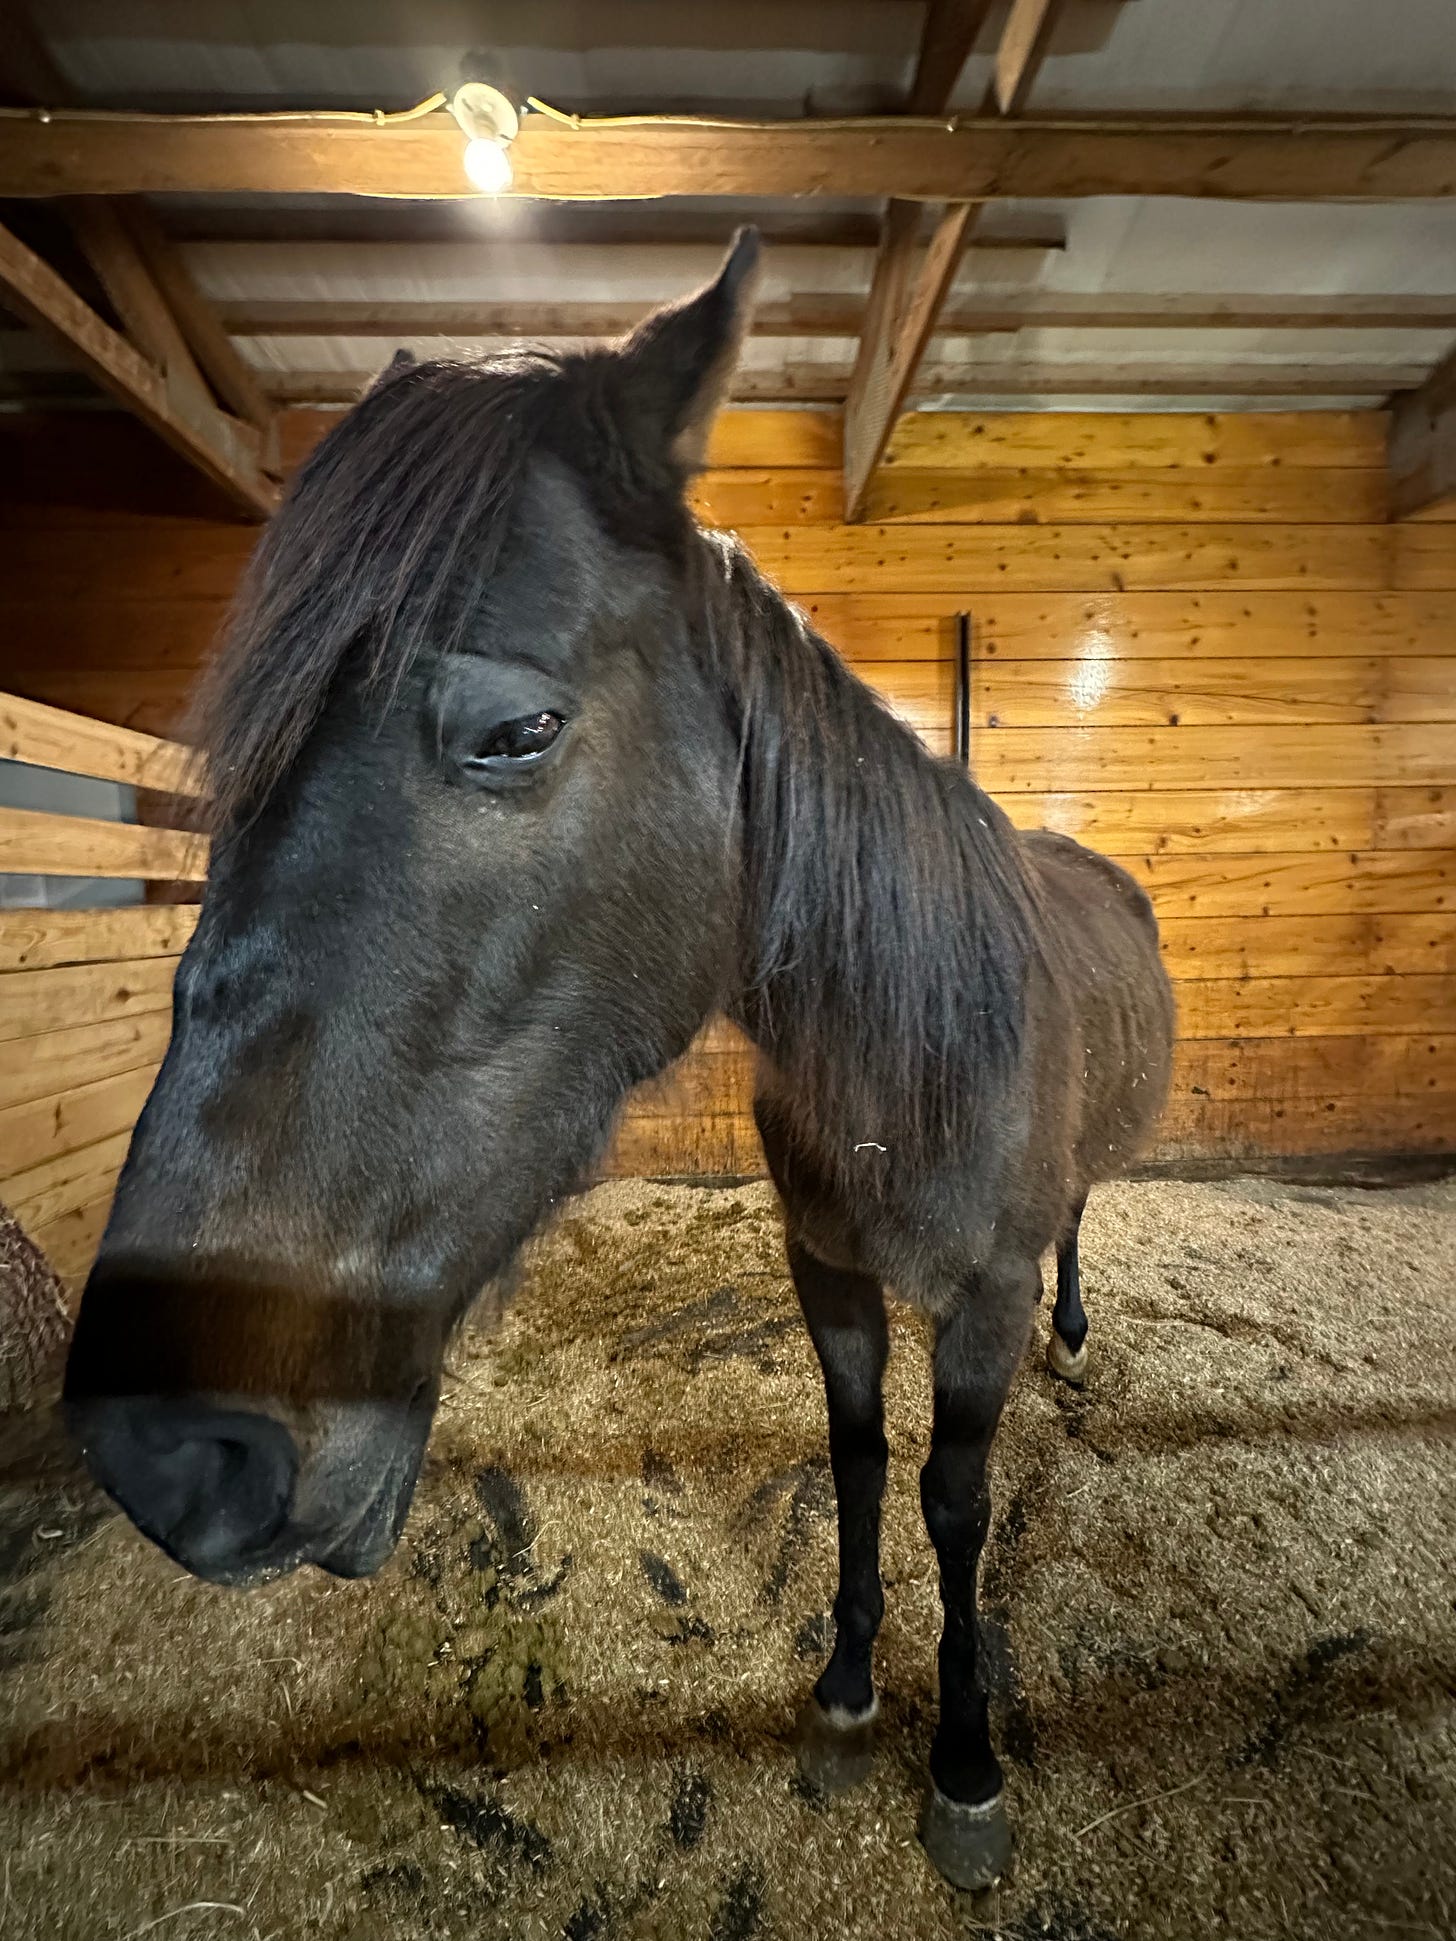 Dark-colored mare, her head is close up and her body is far, appearing small. She is in a stall.